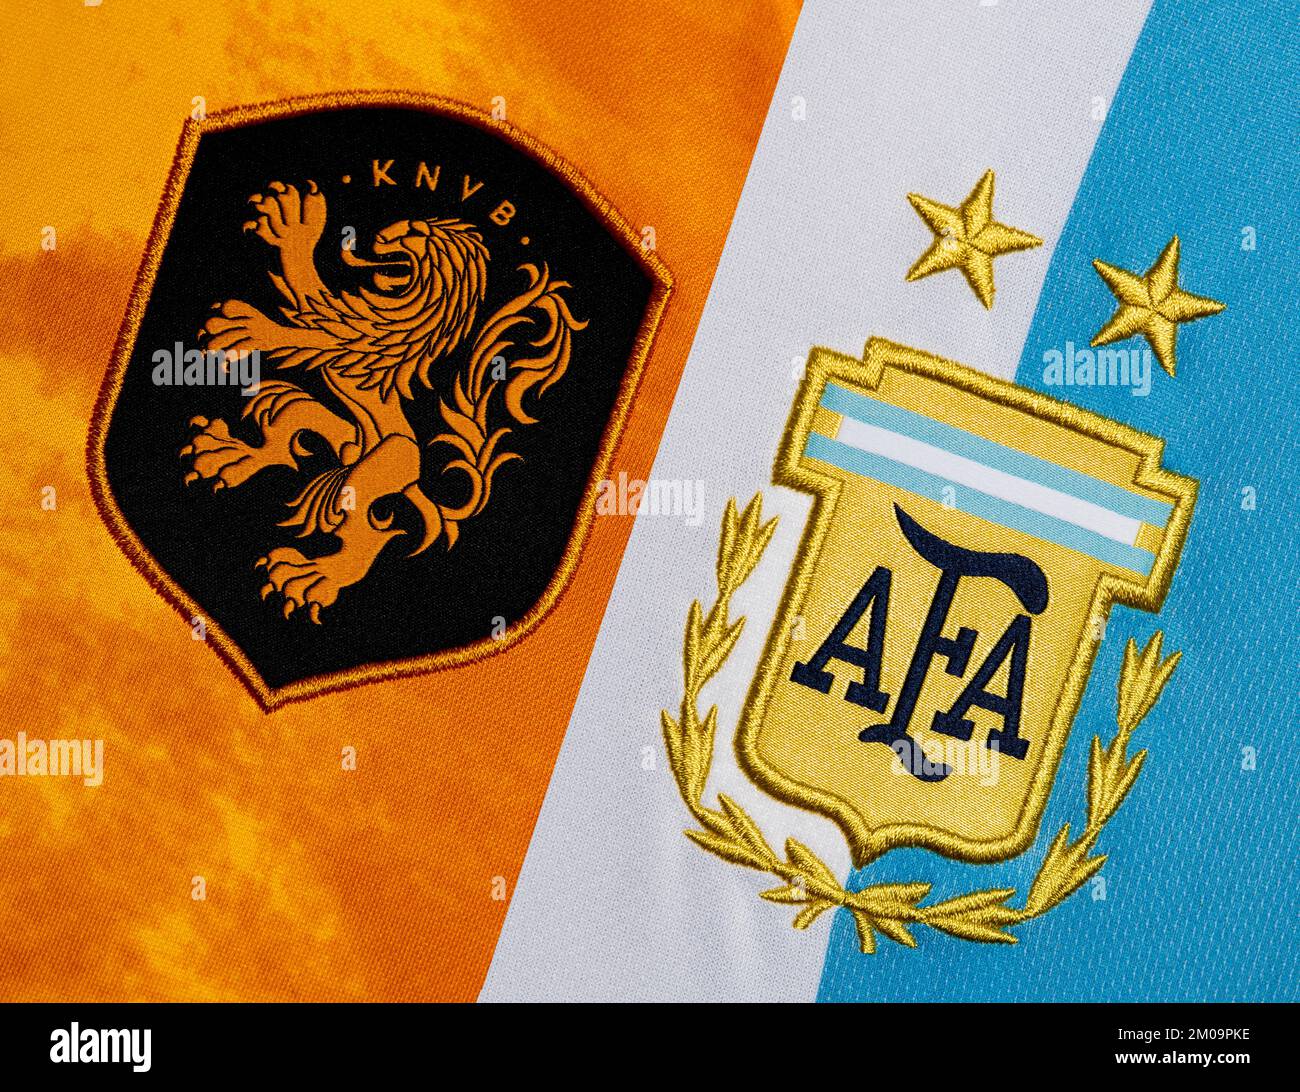 Close up of National Football team crest on home kit. FIFA World Cup Qatar 2022 Stock Photo